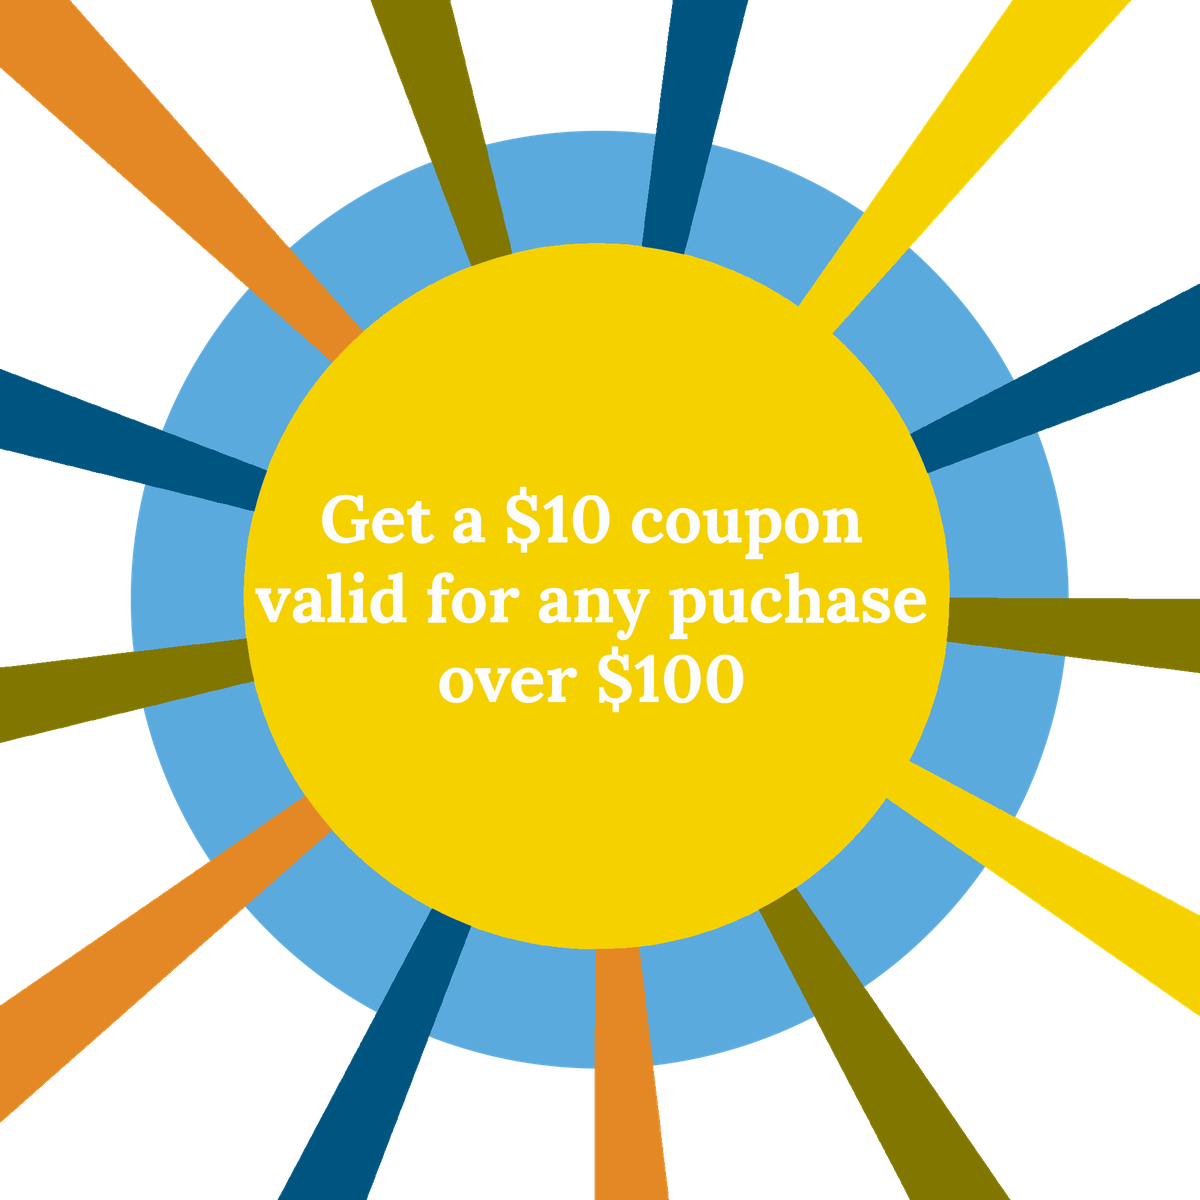 Get a $10 coupon valid for any purchase over $100